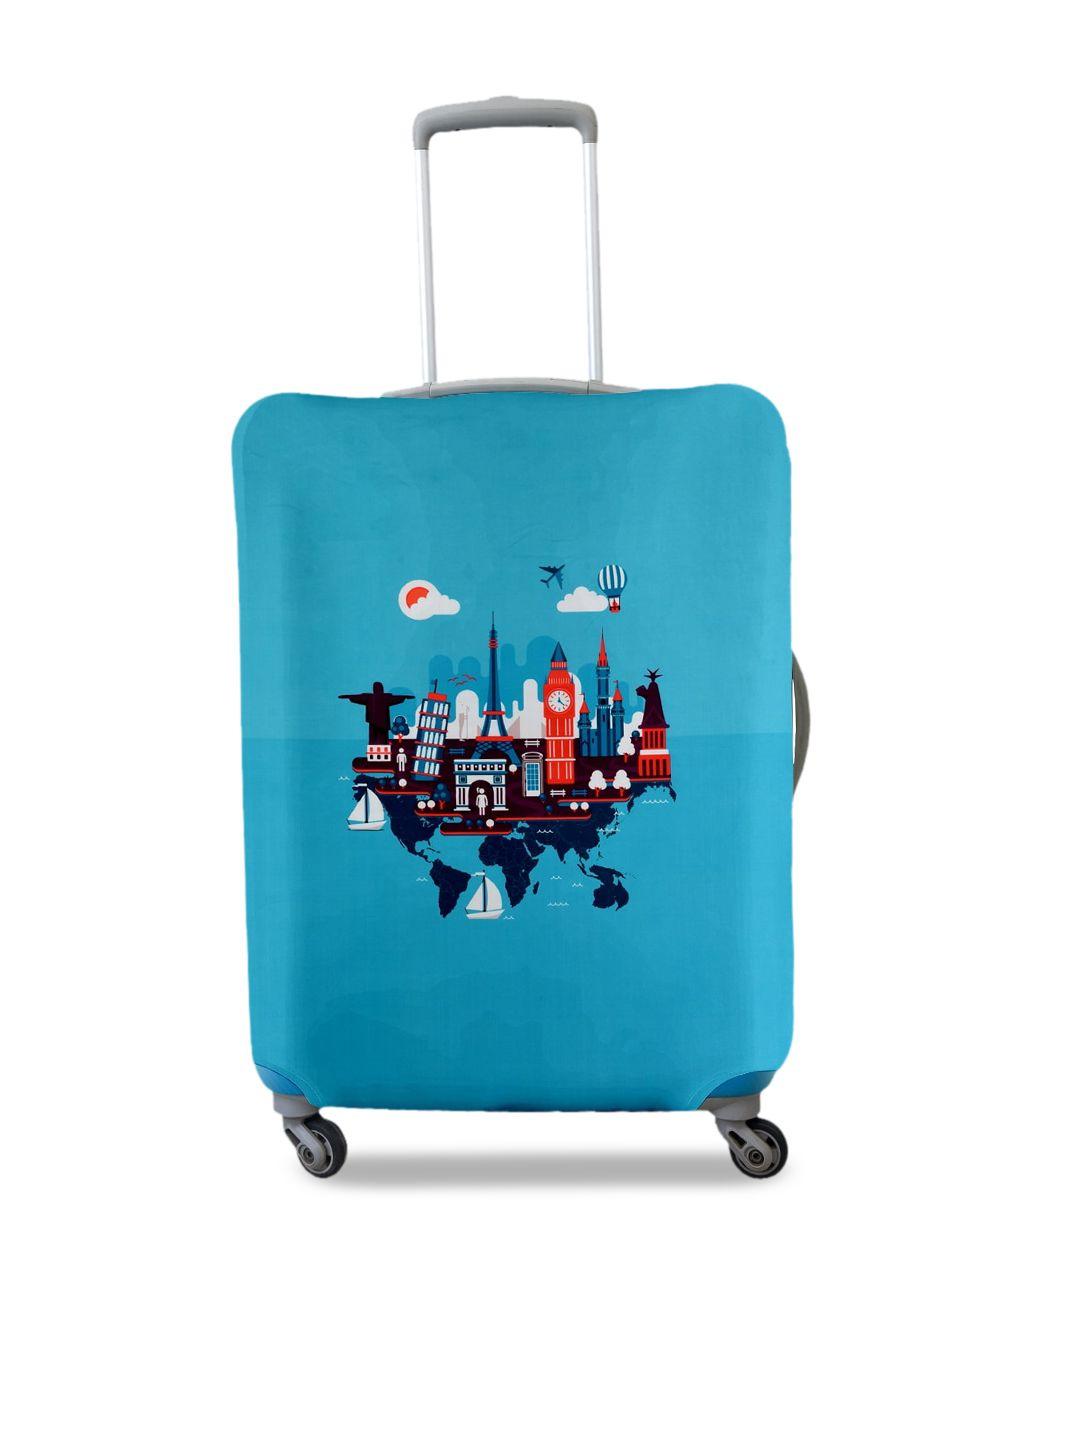 cortina blue printed protective large trolley bag cover